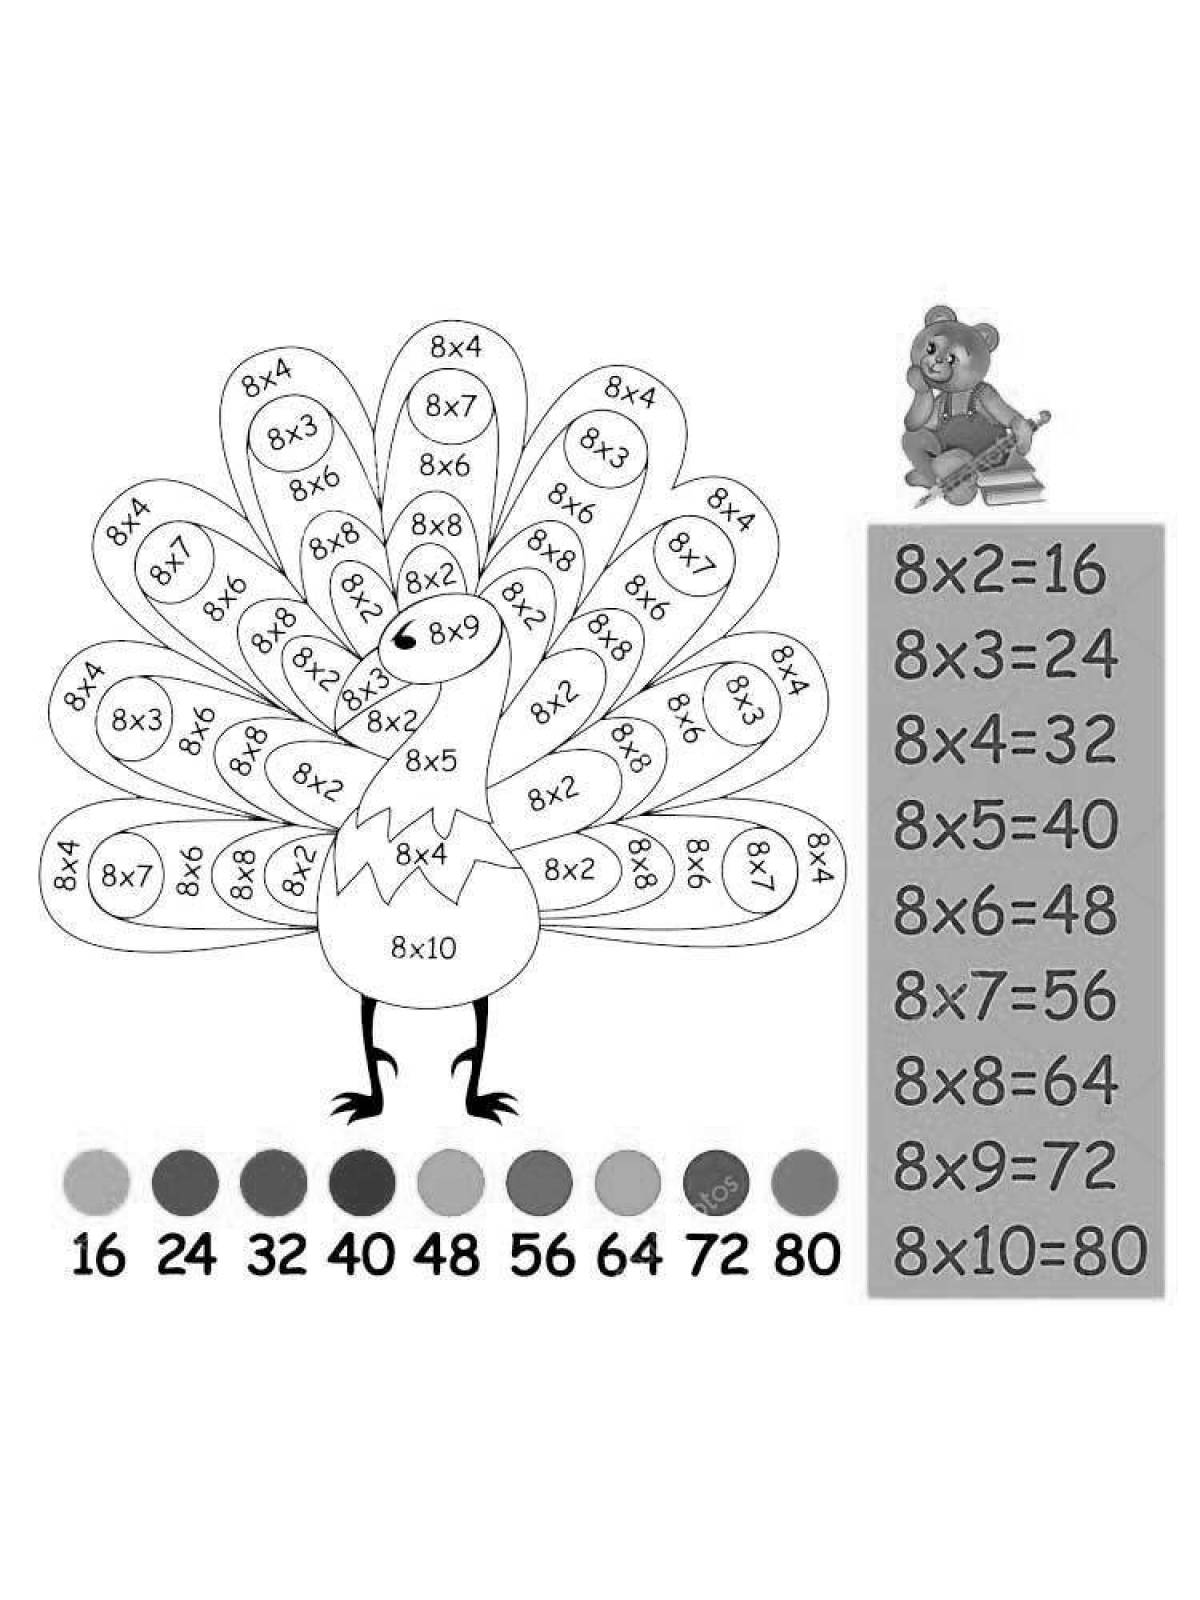 An interesting multiplication table for 2